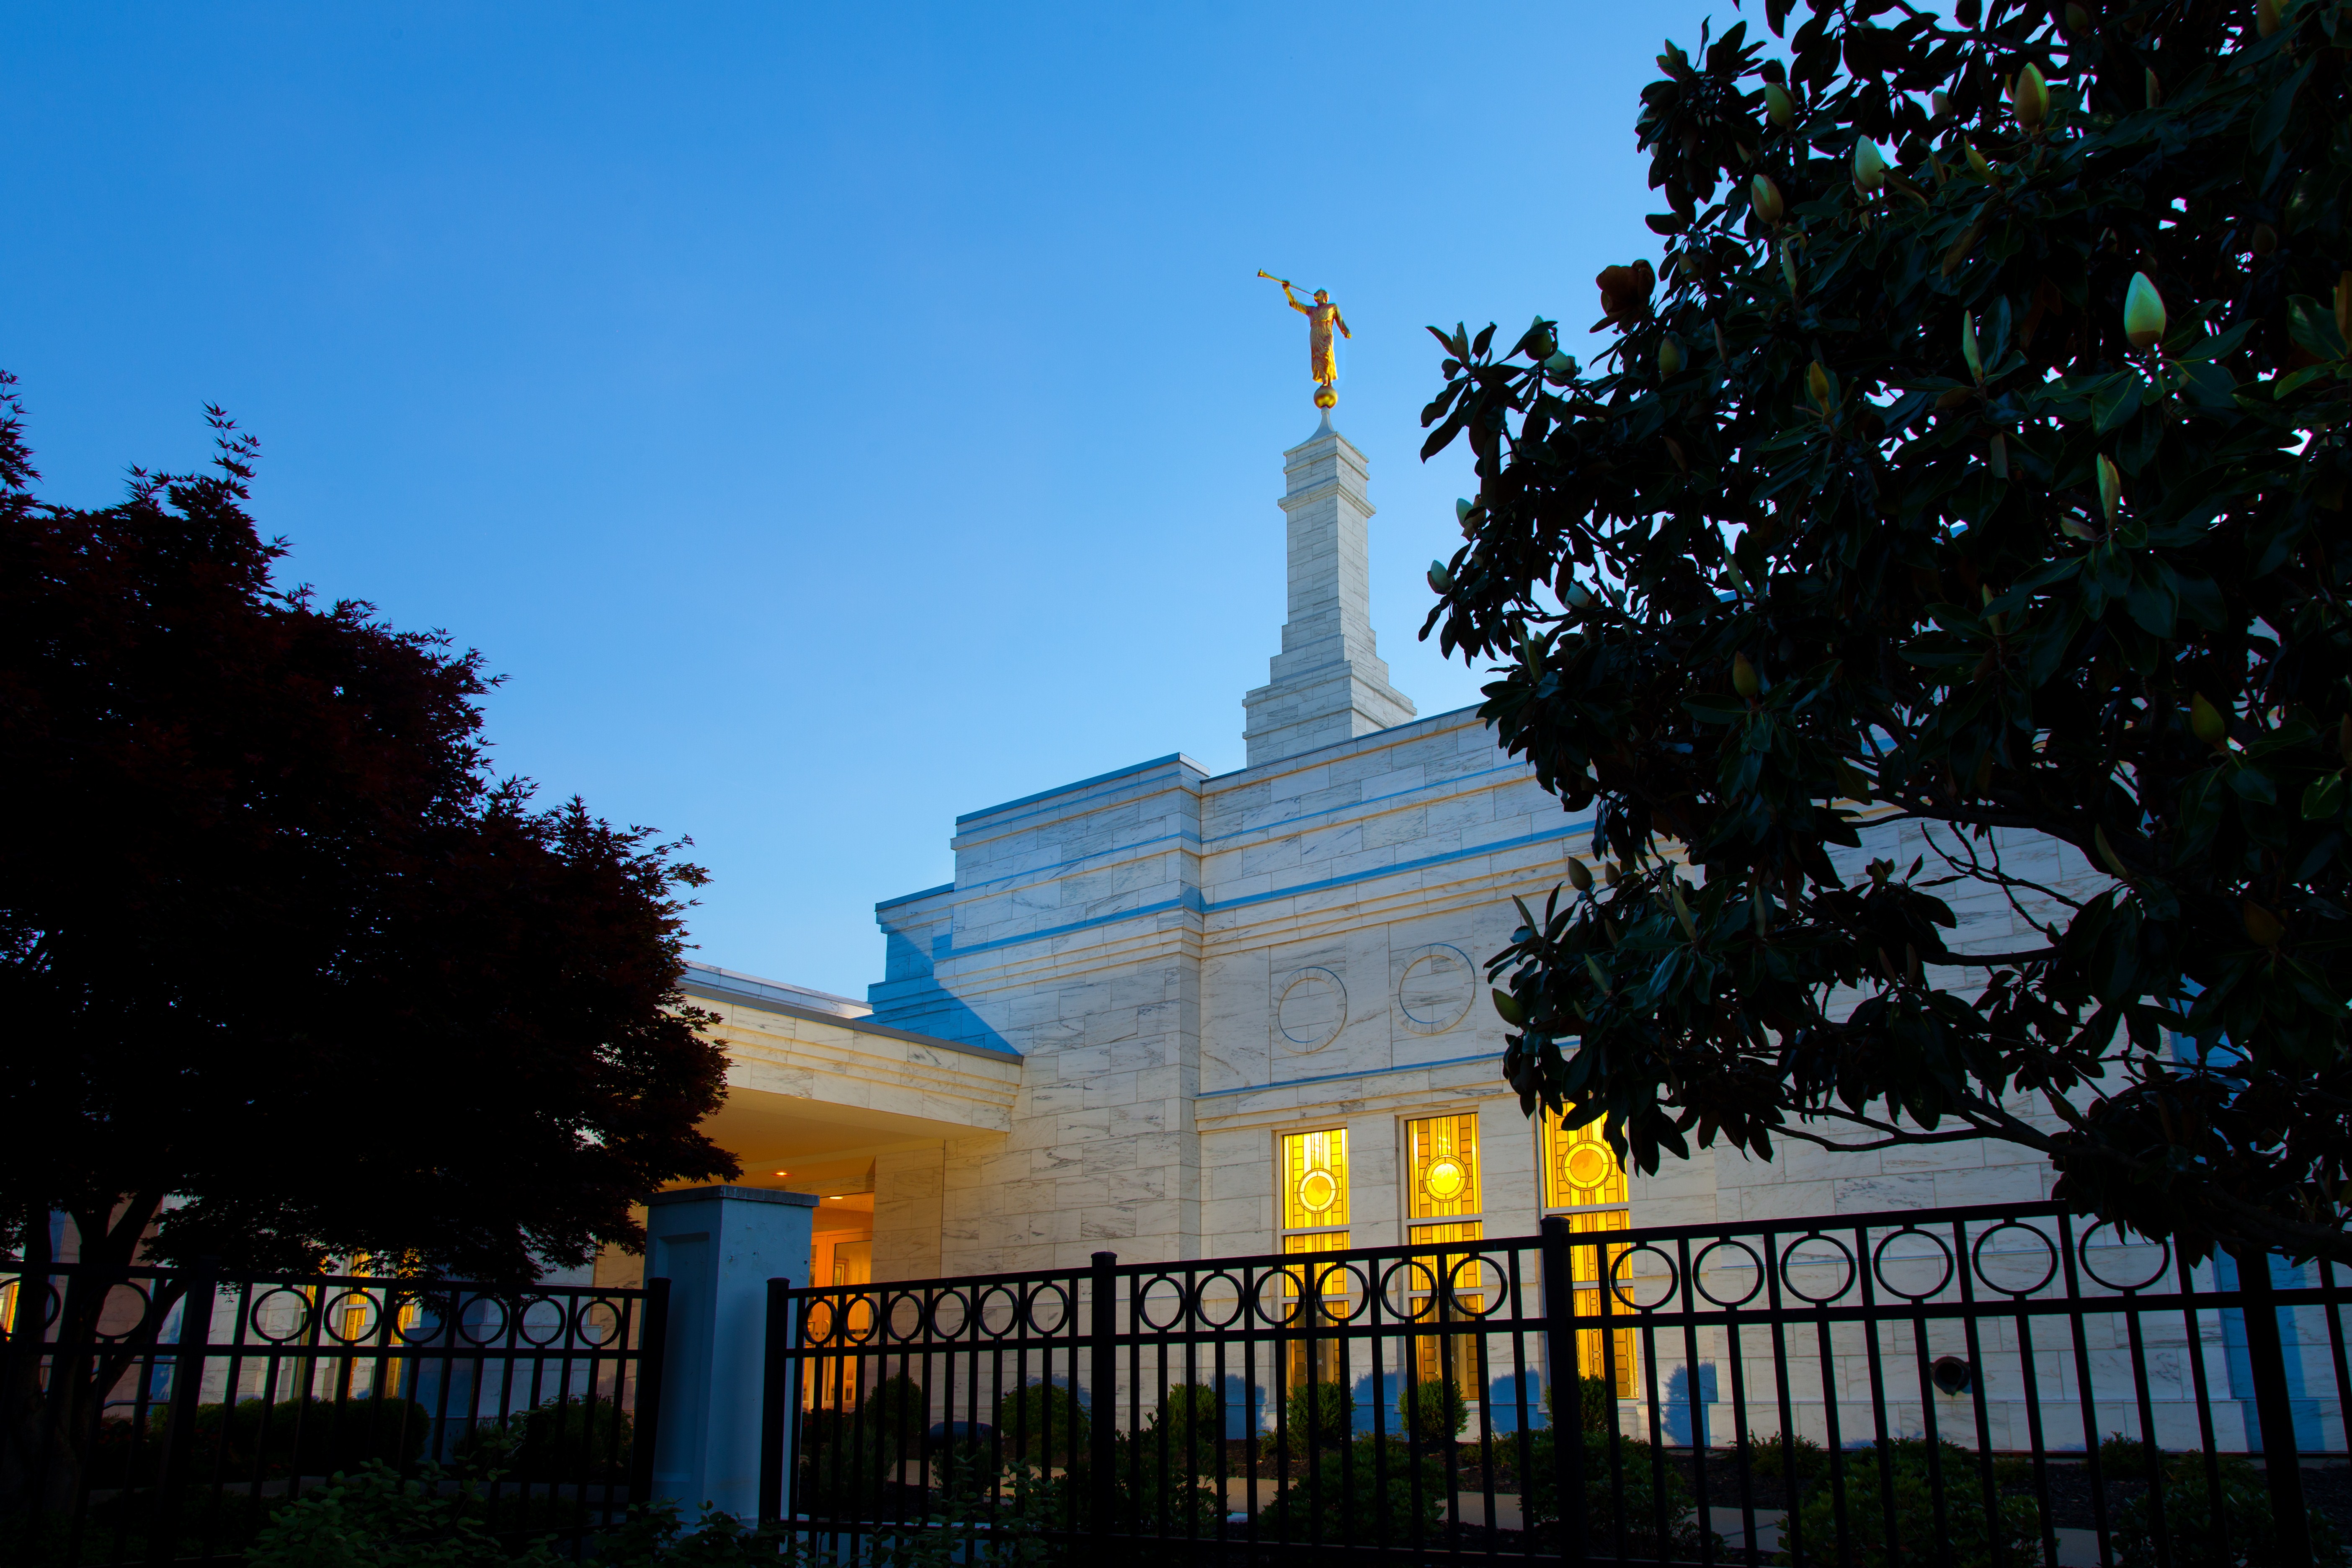 The exterior of the Memphis Tennessee Temple.